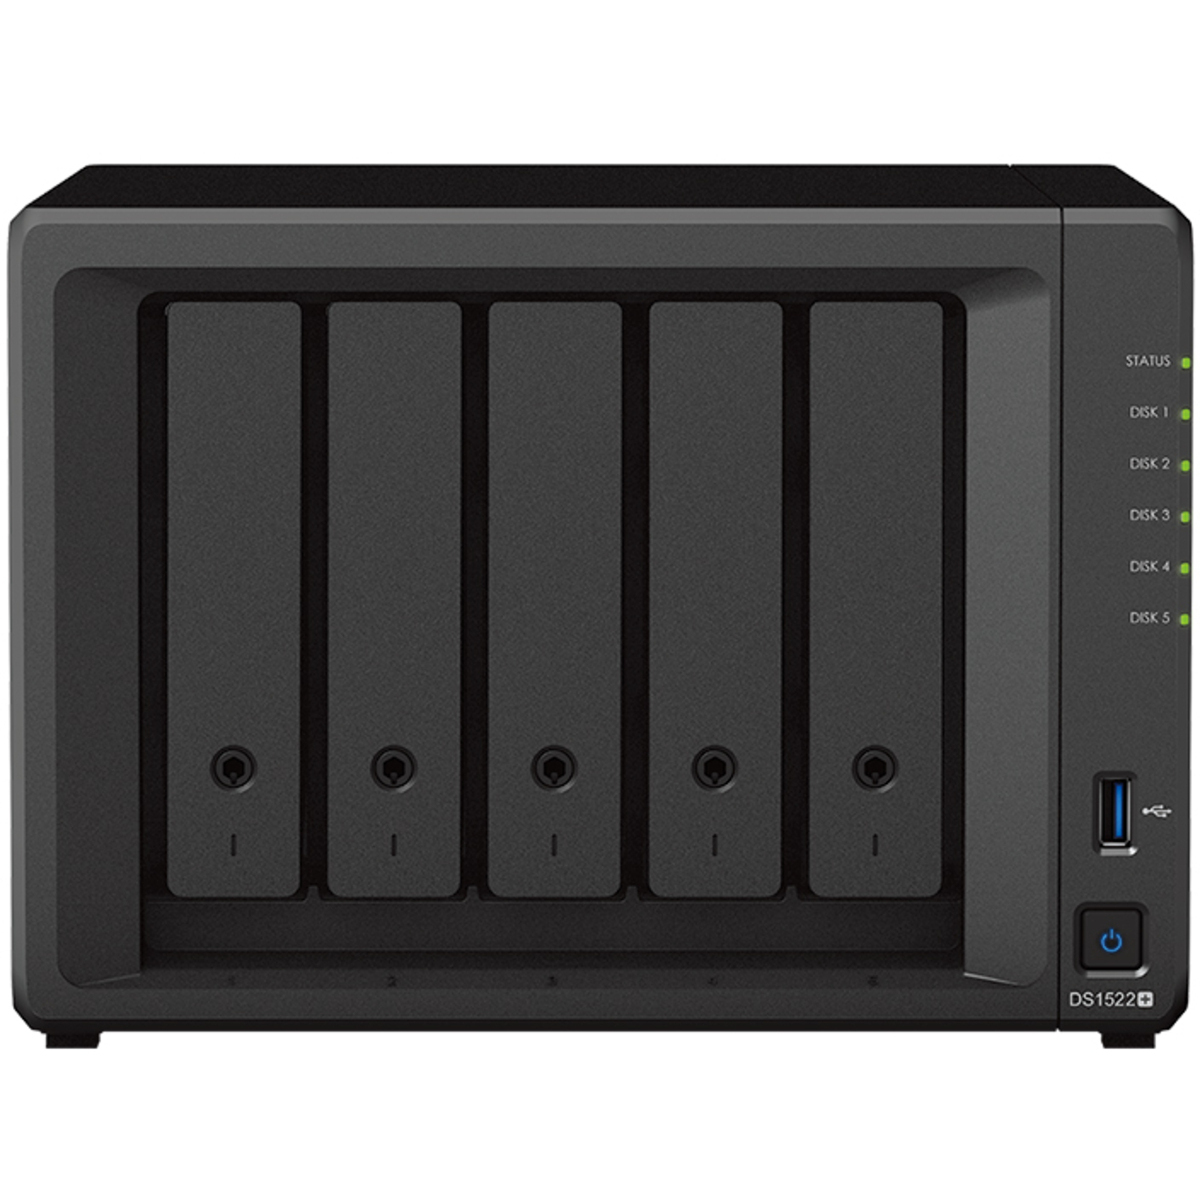 Synology DiskStation DS1522+ 80tb 5-Bay Desktop Multimedia / Power User / Business NAS - Network Attached Storage Device 5x16tb Seagate IronWolf Pro ST16000NT001 3.5 7200rpm SATA 6Gb/s HDD NAS Class Drives Installed - Burn-In Tested - ON SALE DiskStation DS1522+